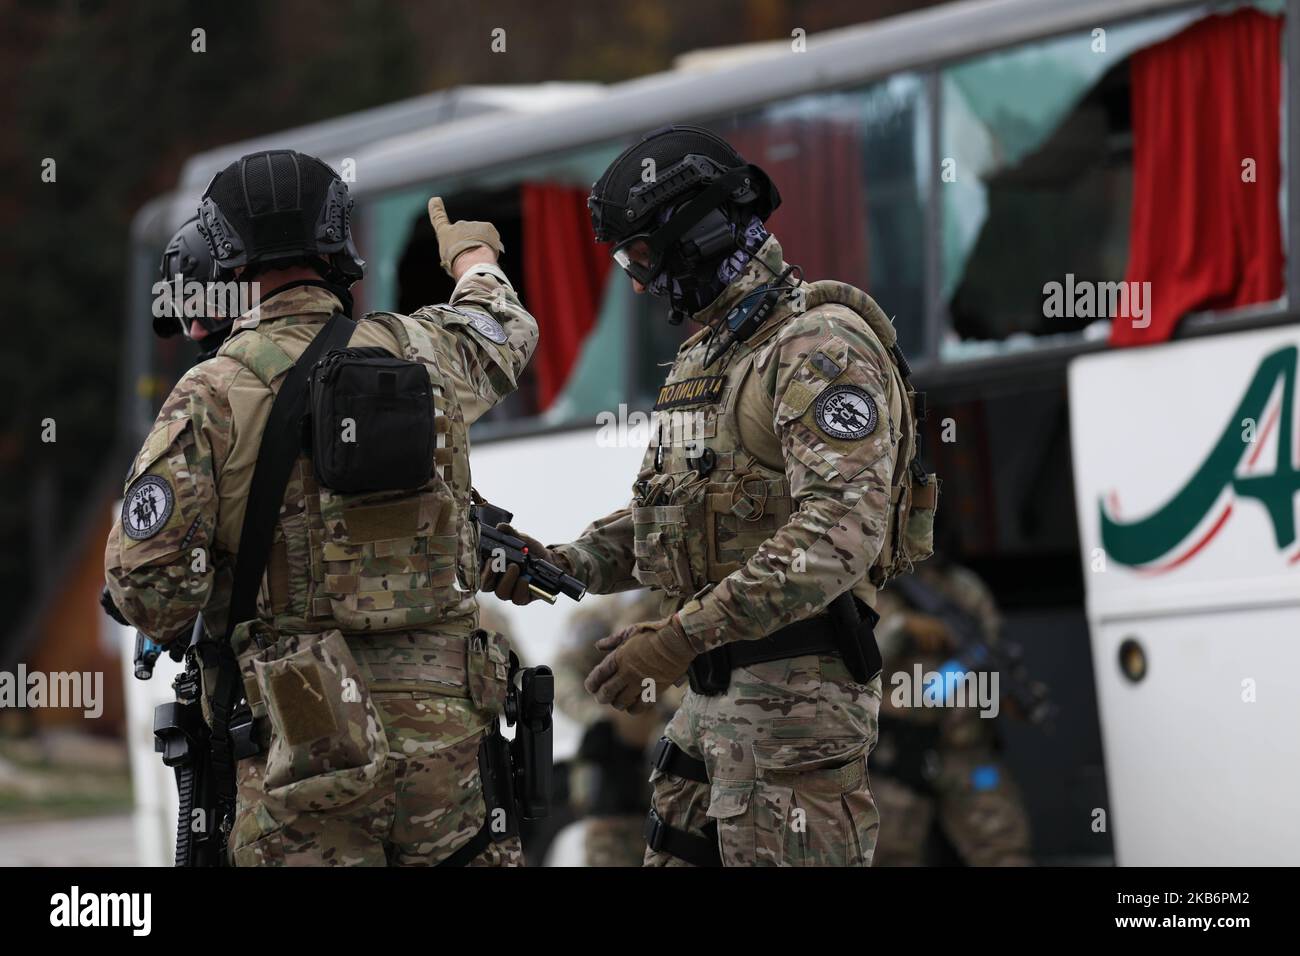 A member of the Special Support Units (SSU) of Bosnia-Herzegovina State Investigation Protection Agency (SIPA) signals the rest of the team before checking the bus storage spaces during a raid as part of exercise Brutalist Tornjak in Sarajevo, Bosnia and Herzegovina Oct. 19, 2022. The SIPA SSU and the U.S. Army 10th Special Forces Group (Airborne) trained together with elements of the Armed Forces of Bosnia and Herzegovina in an interagency joint exercise focusing on direct action in close environments to secure high value targets. (U.S. Army photo by Spc. Mercedes Johnson) Stock Photo